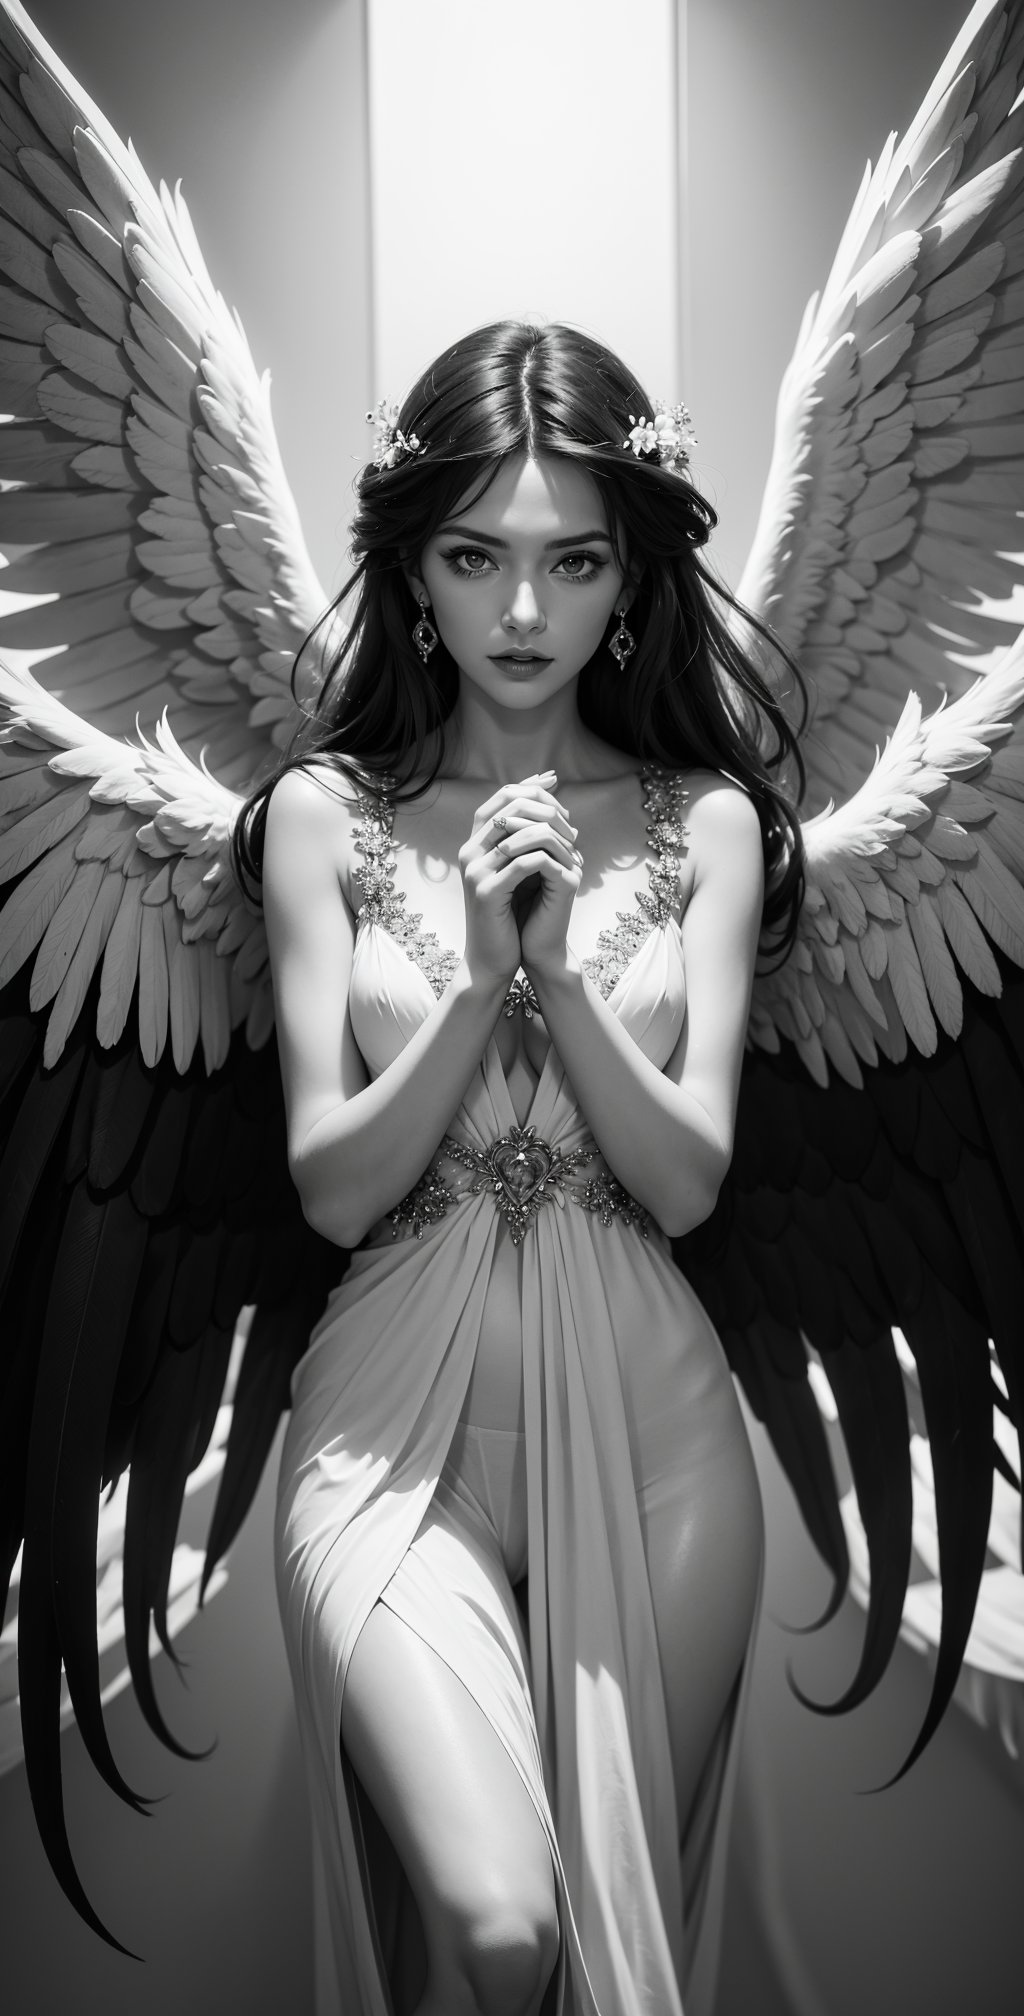 Angel descending from heaven, [Monica Belluci], [2wings], long hair, joyful, black and white color palette, fashion photography, high resolution, detailed, dreamy, depth of field.